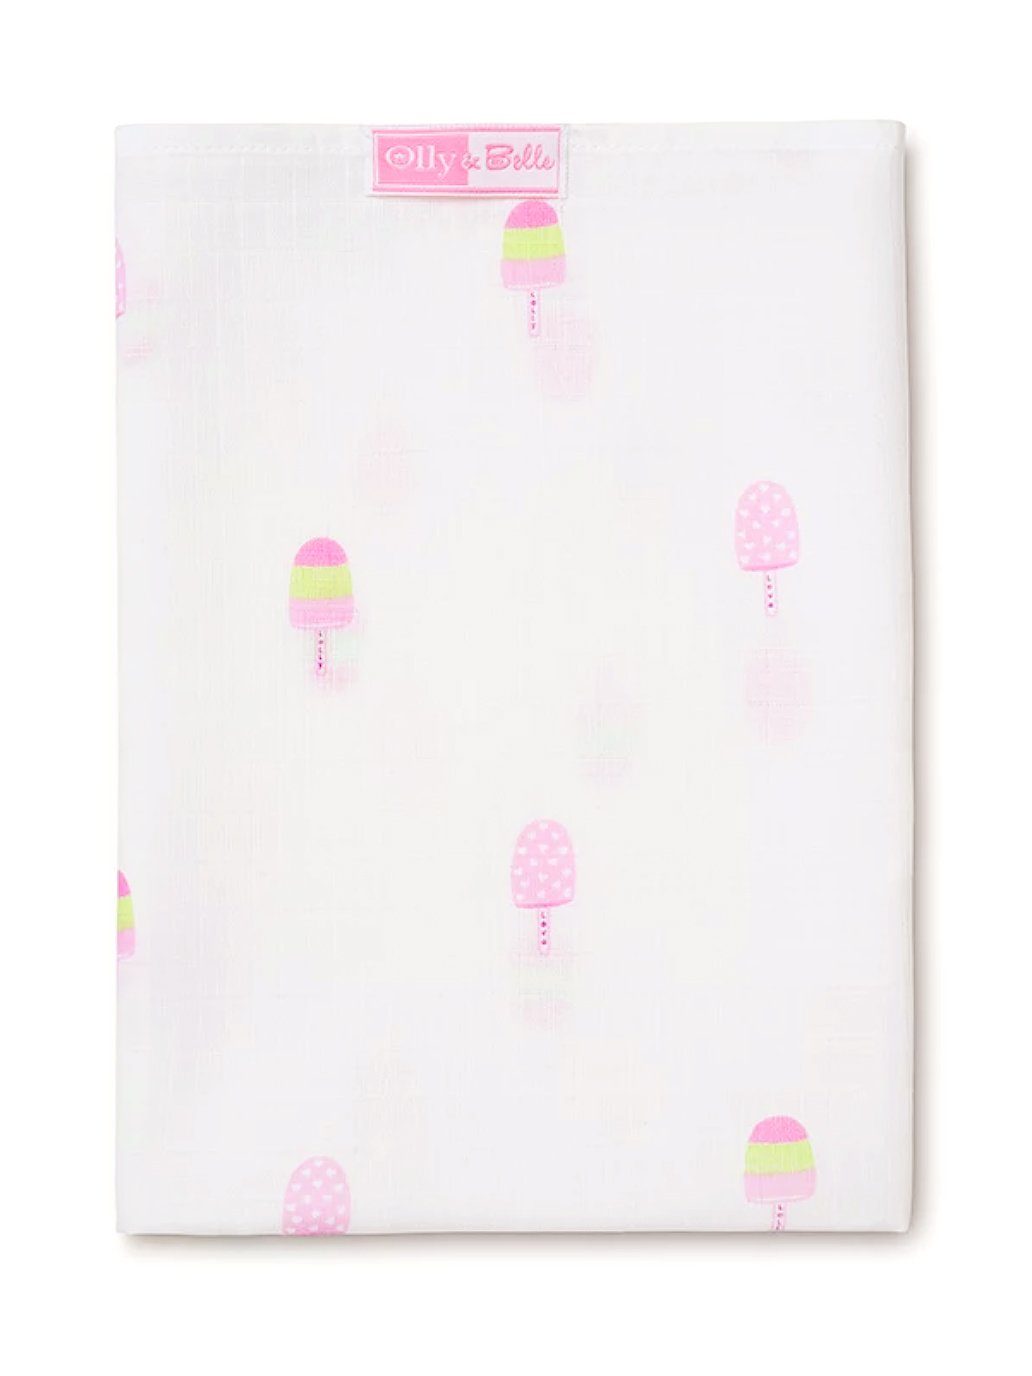 Lolly Print 100% Cotton Muslin Square By Olly & Belle Muslin Olly & Belle 